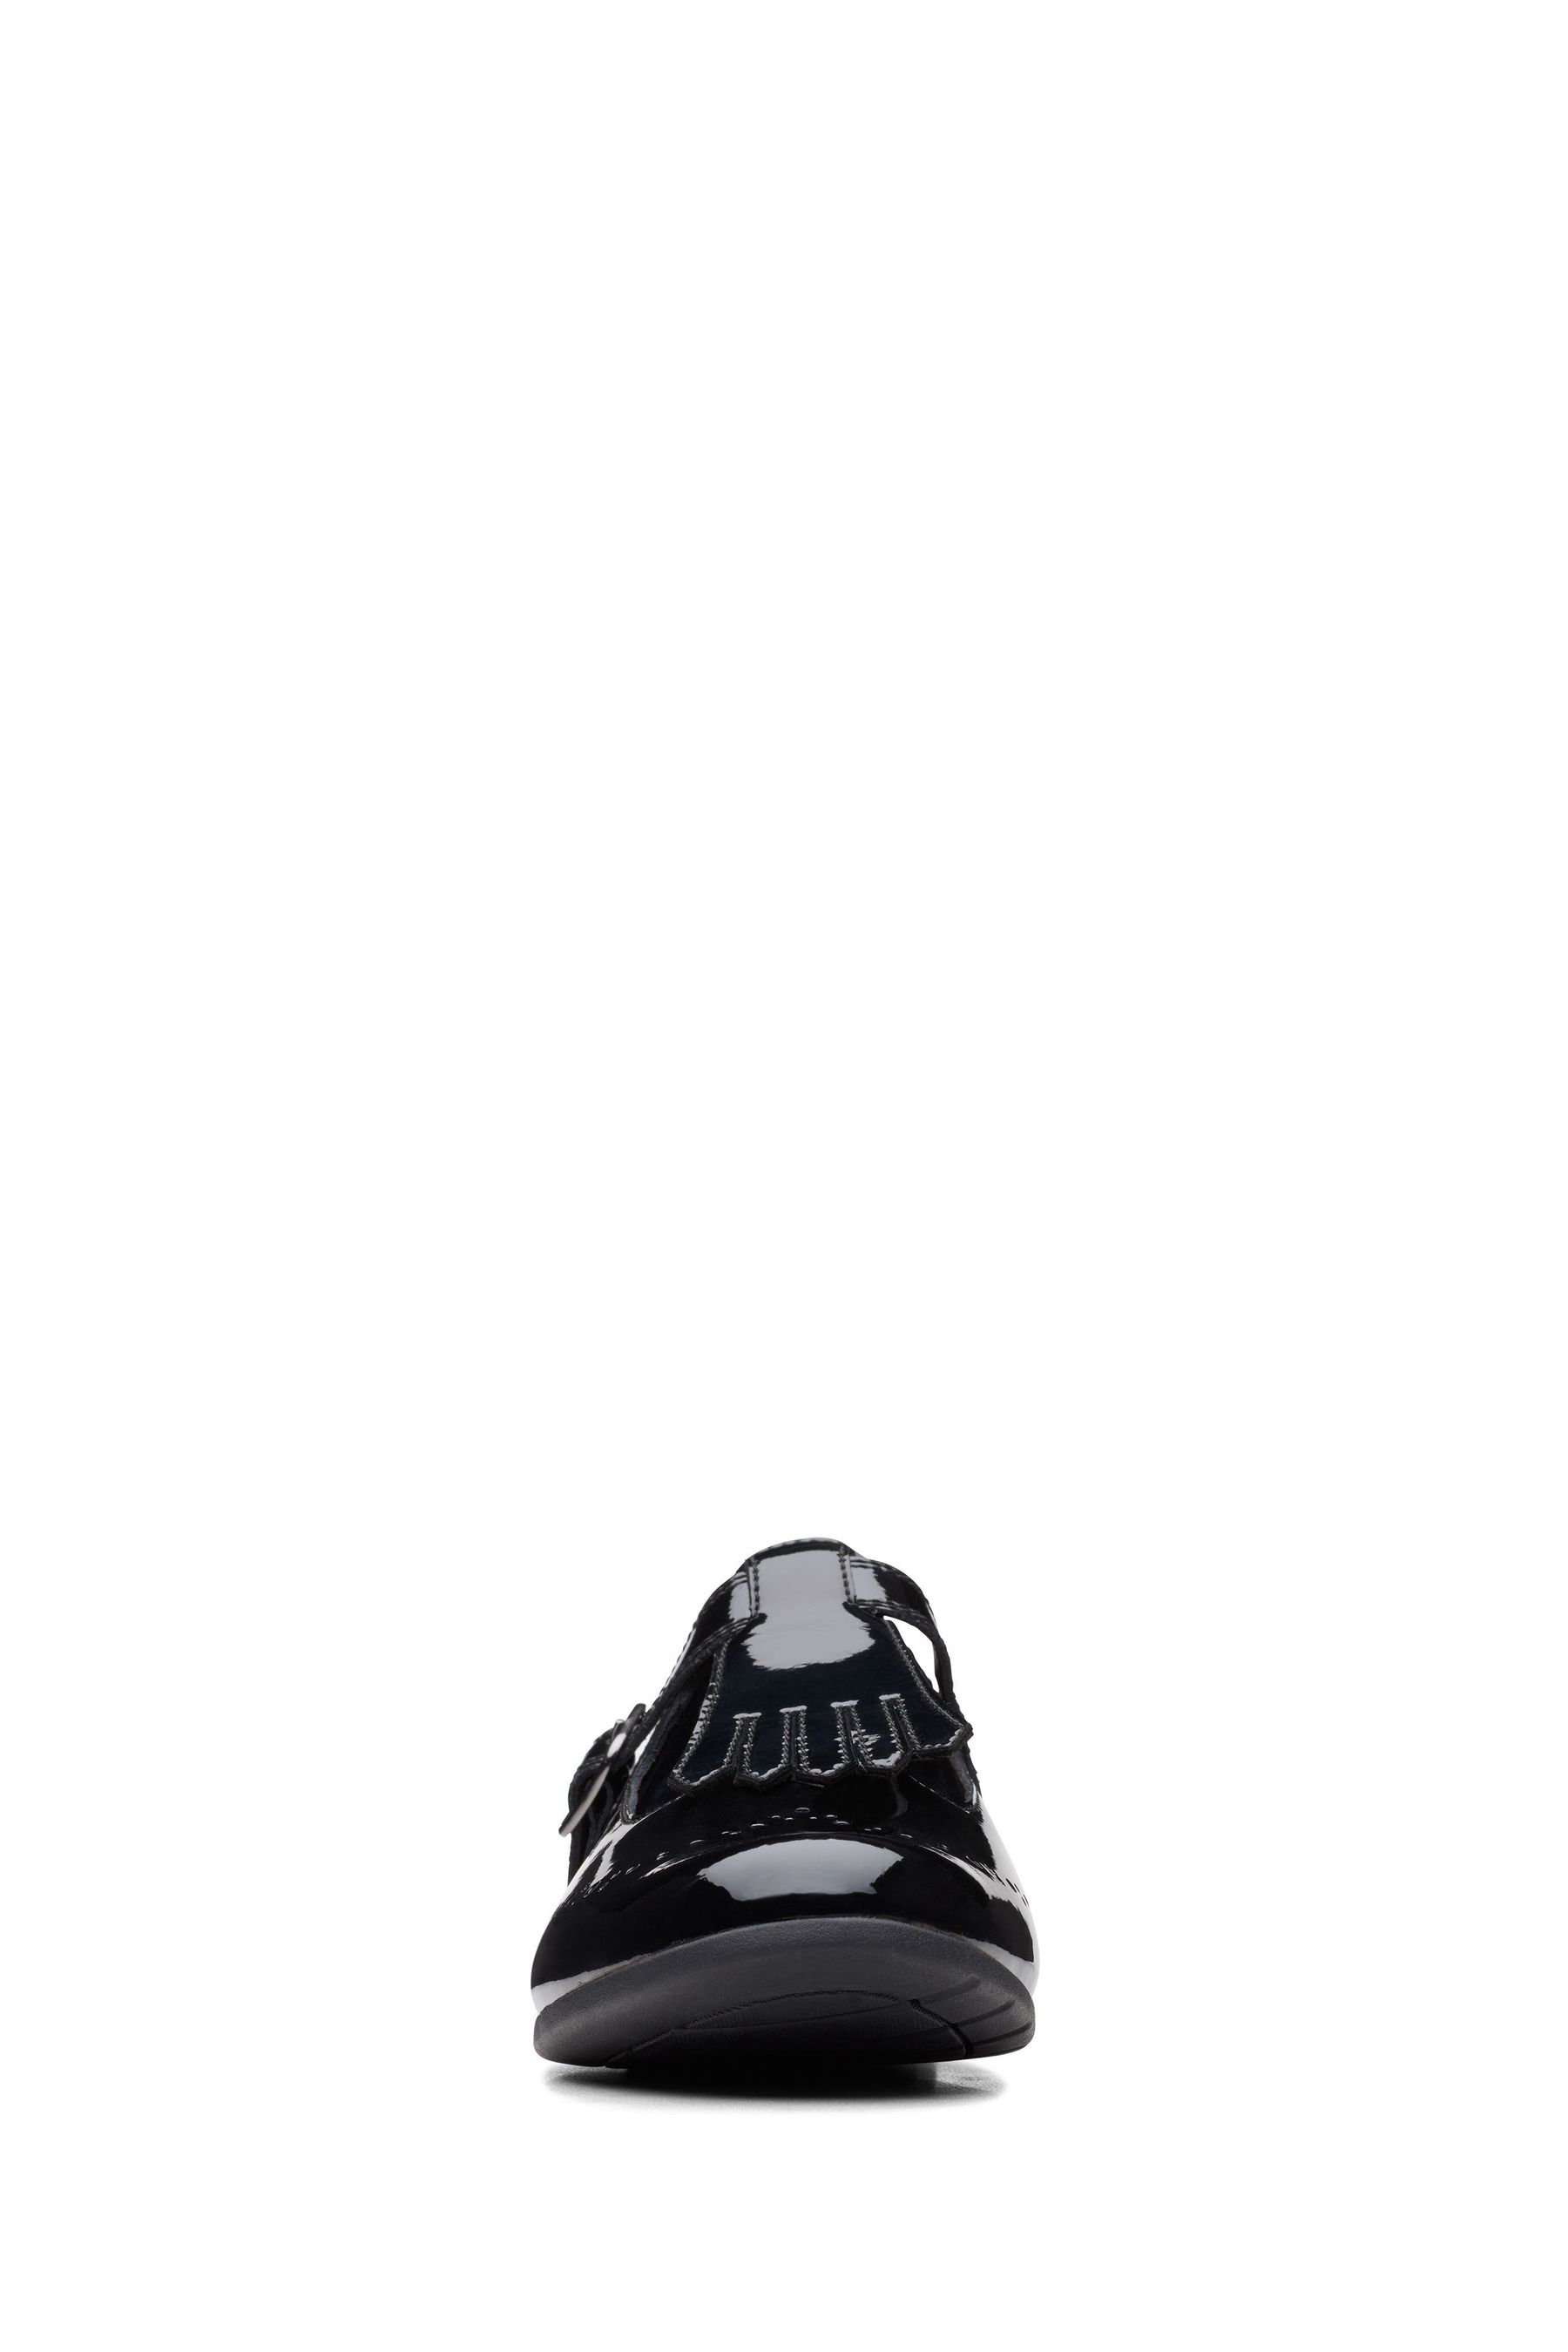 Buy Clarks Black Teen Multi Fit Pat Scala Shoes from the Next UK online ...